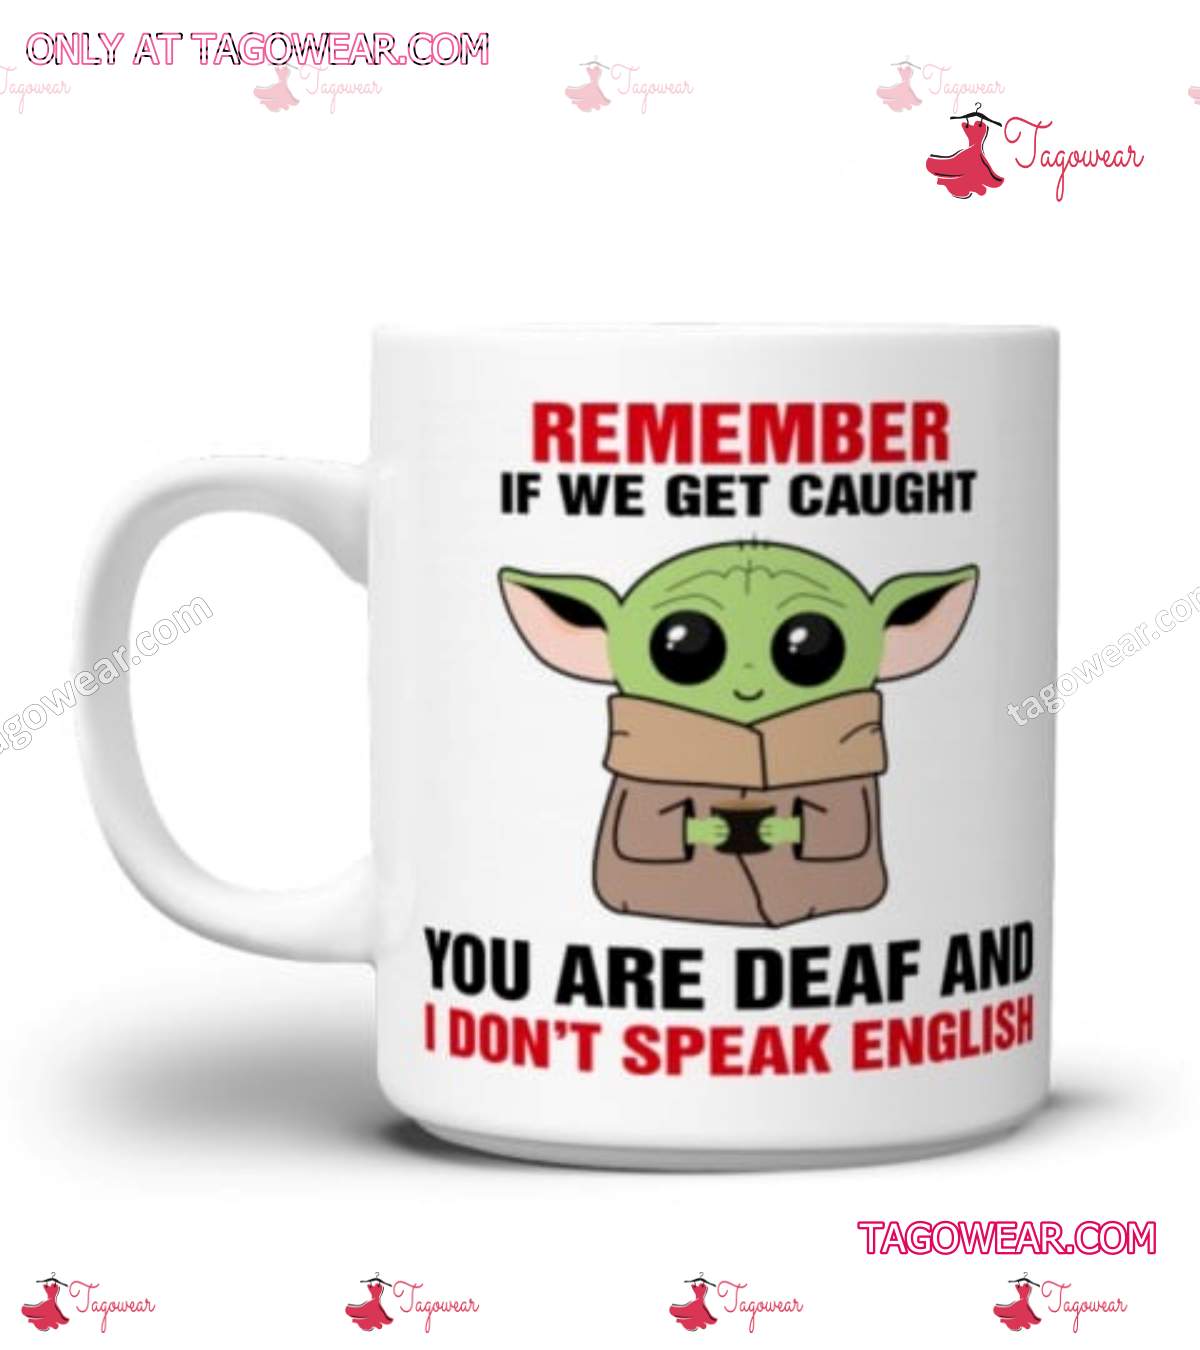 Baby Yoda Remember If We Get Caught You Are Deaf And I Don't Speak English Mug